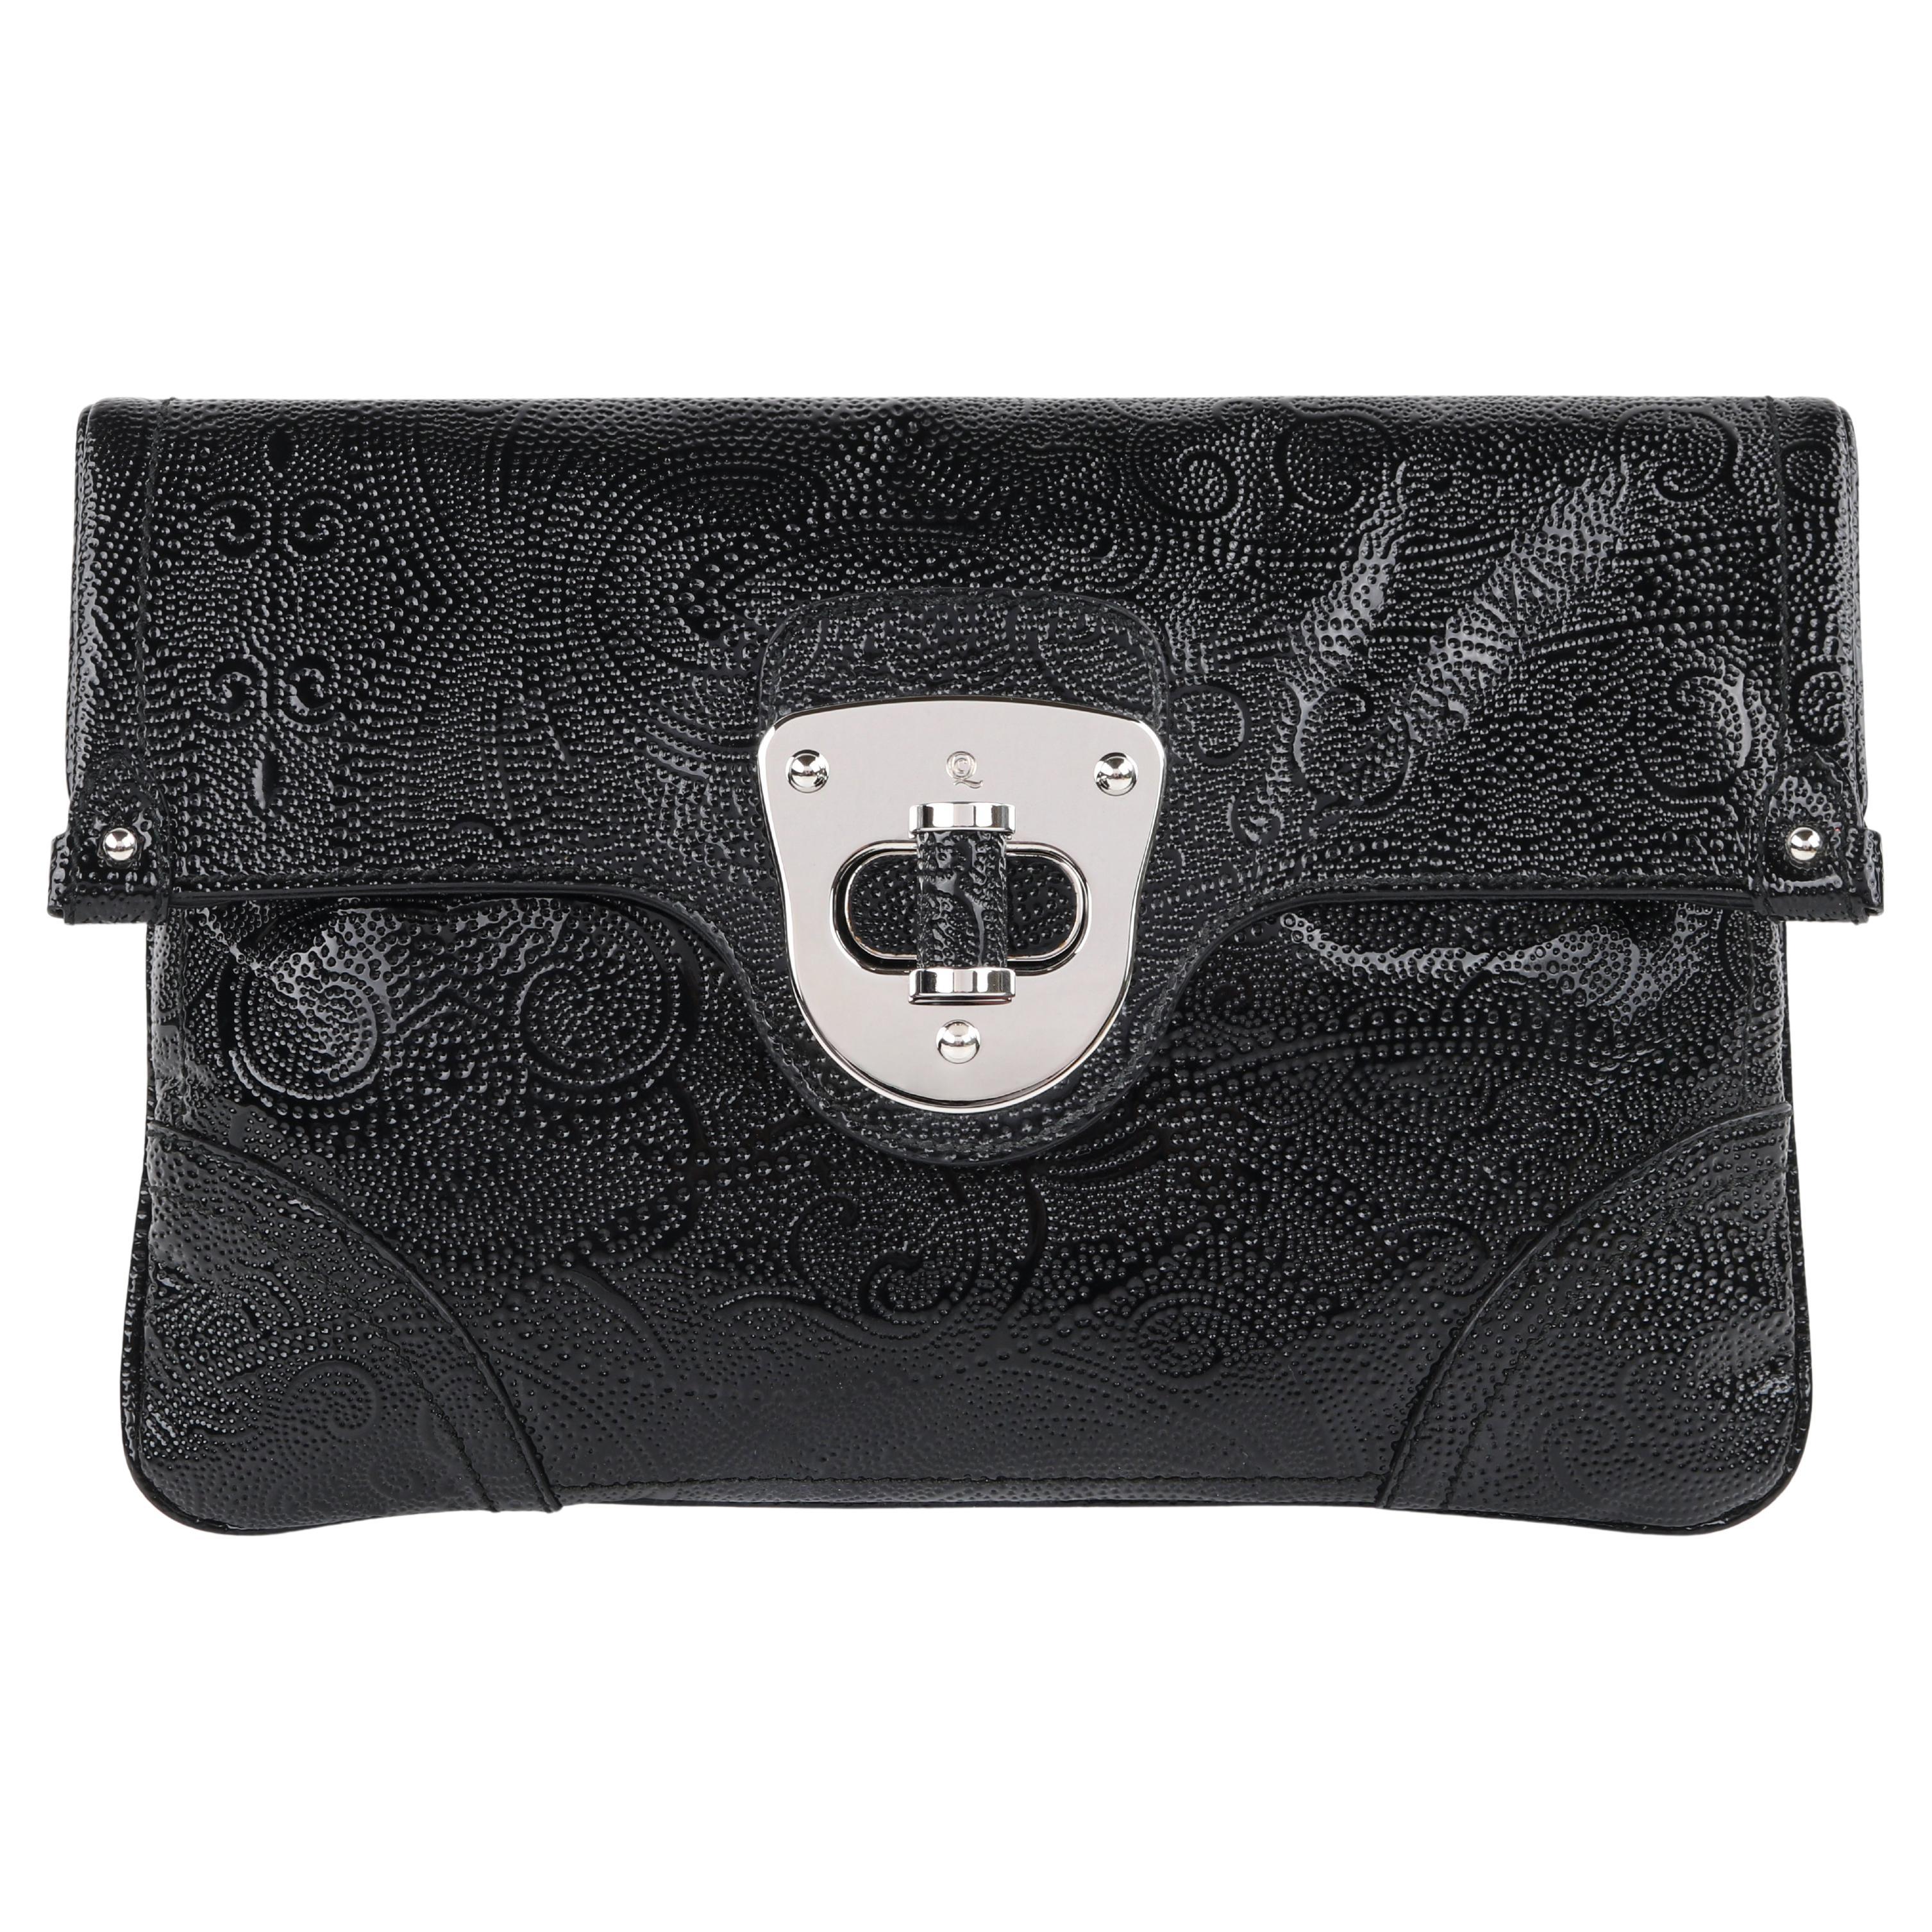 ALEXANDER McQUEEN c.2008 Black Leather Paisley Embossed Large Clutch ...